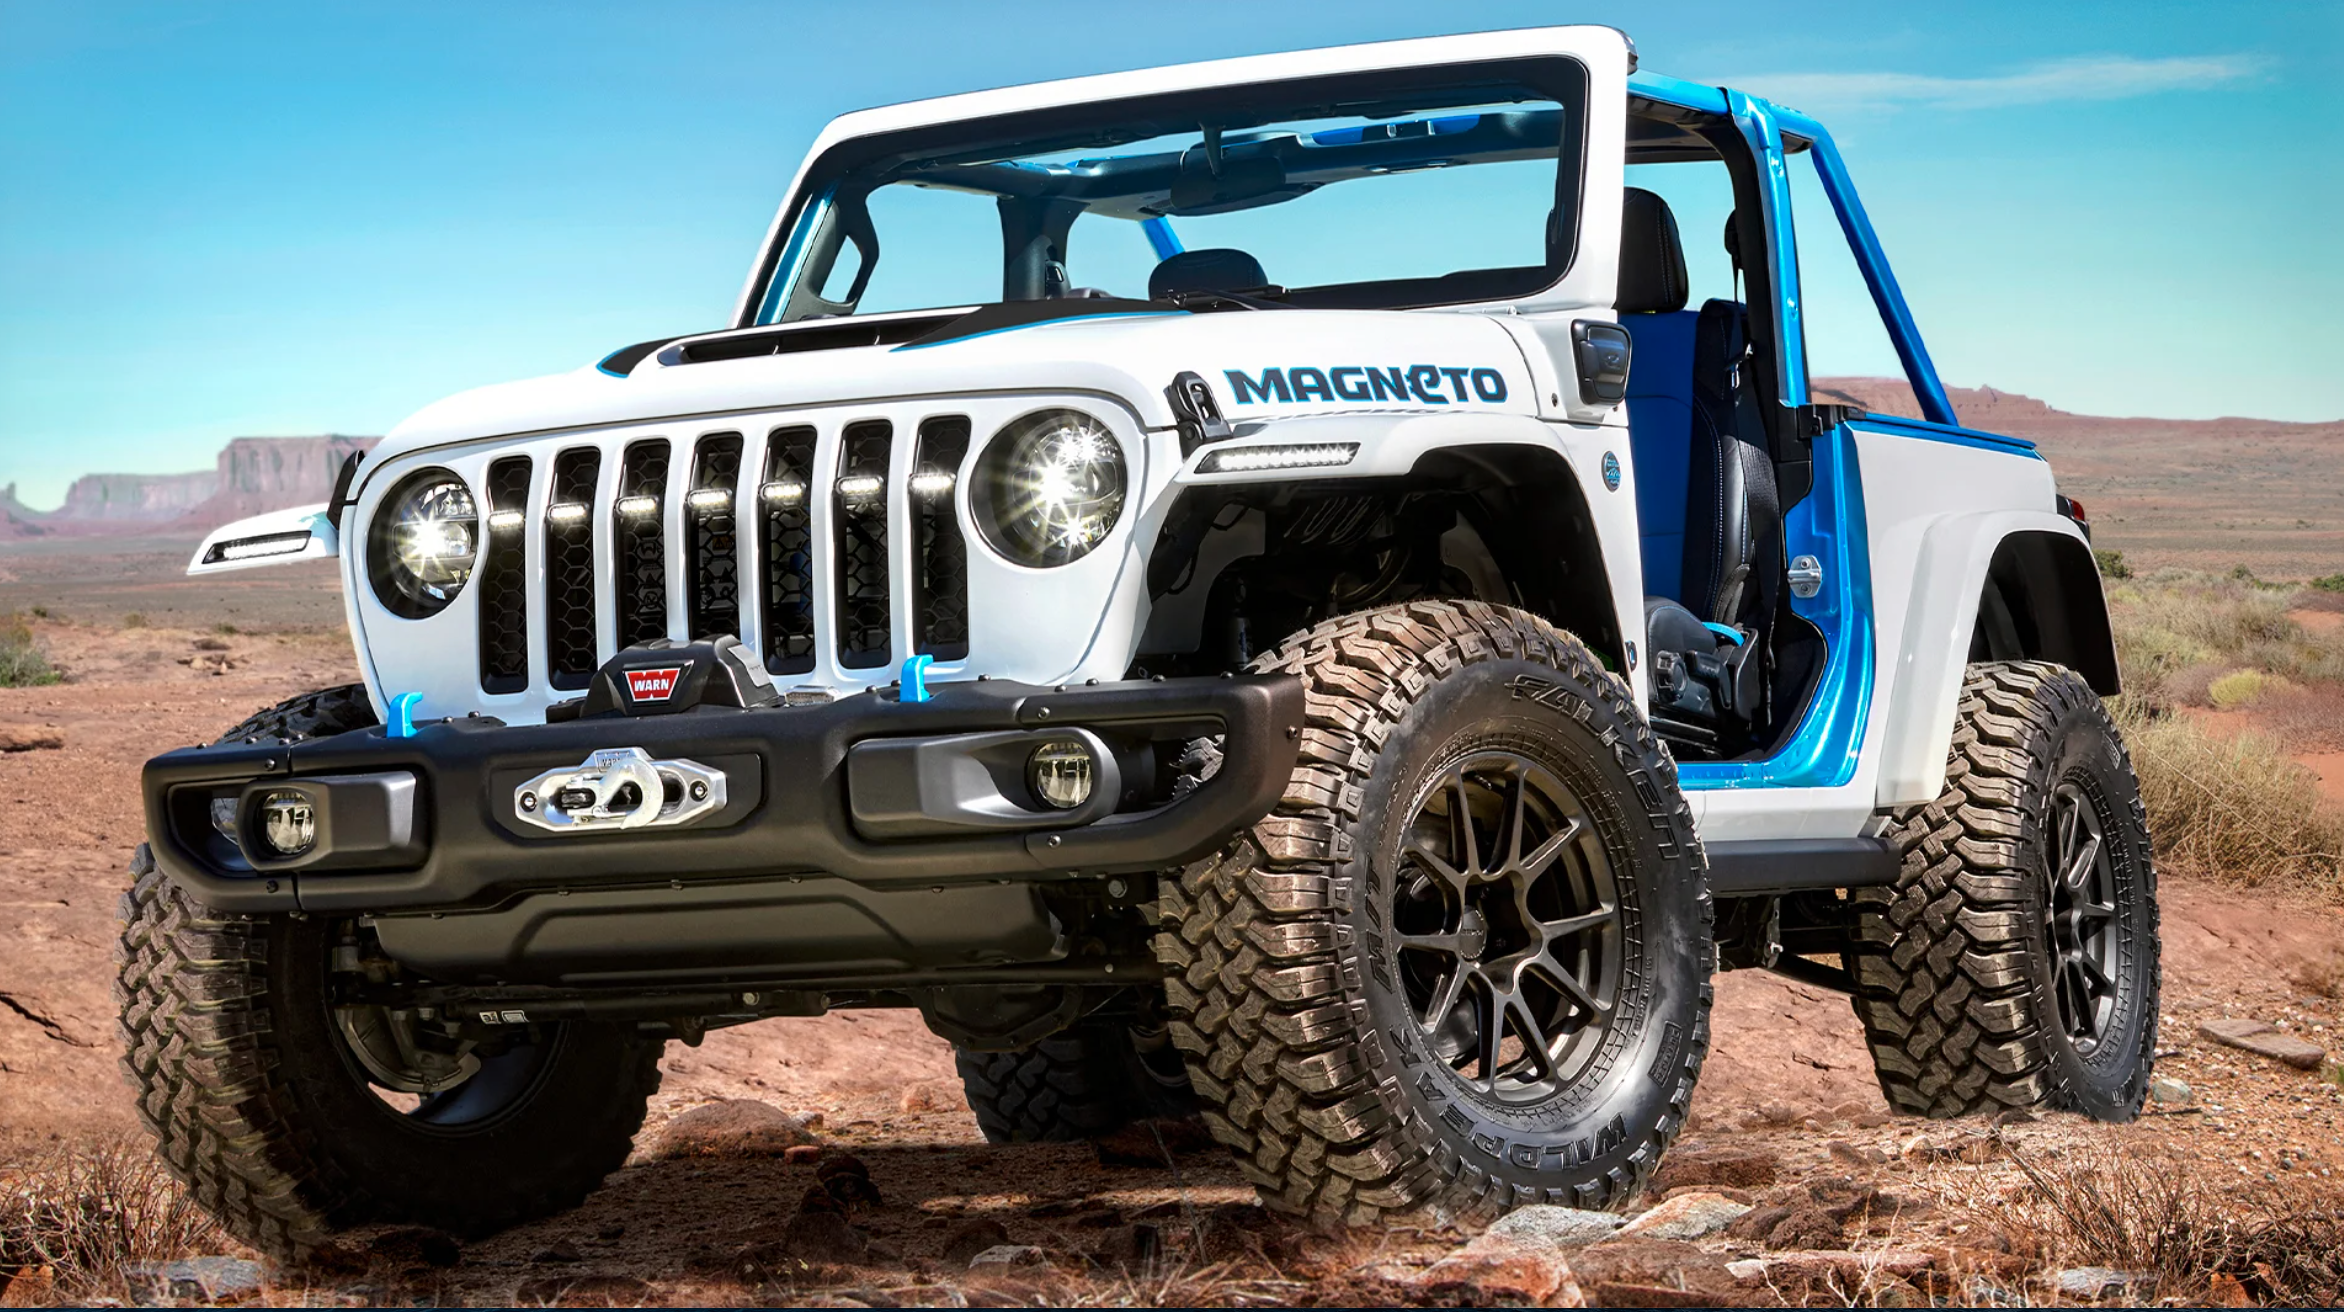 The Jeep Magneto EV concept in Moab